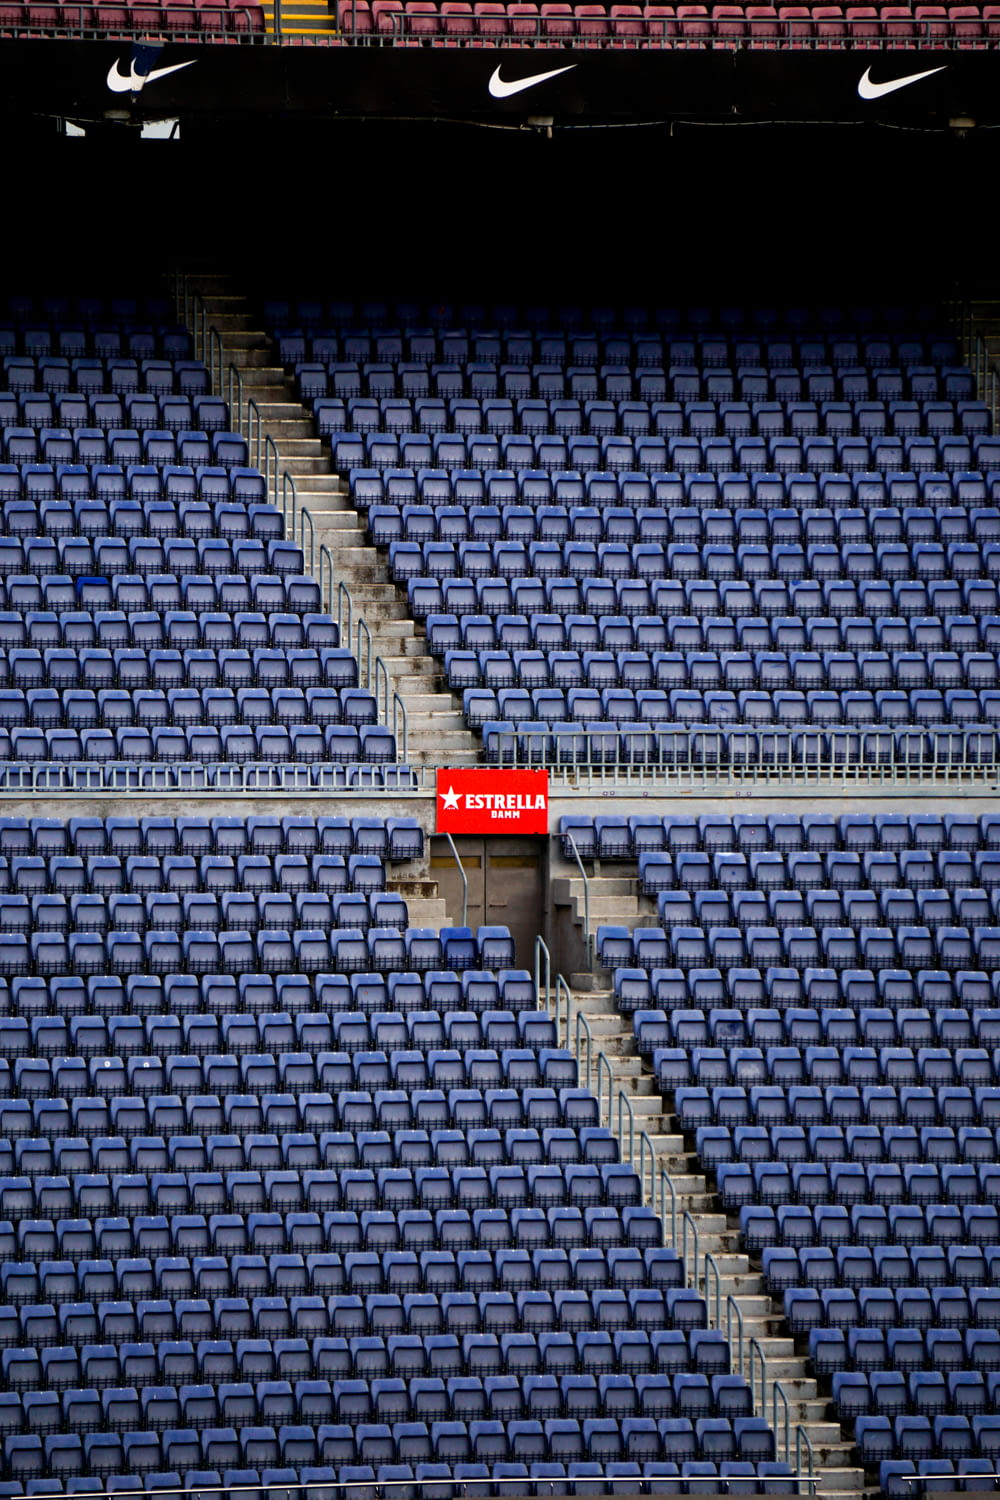 a stadium with blue seats and a red sign